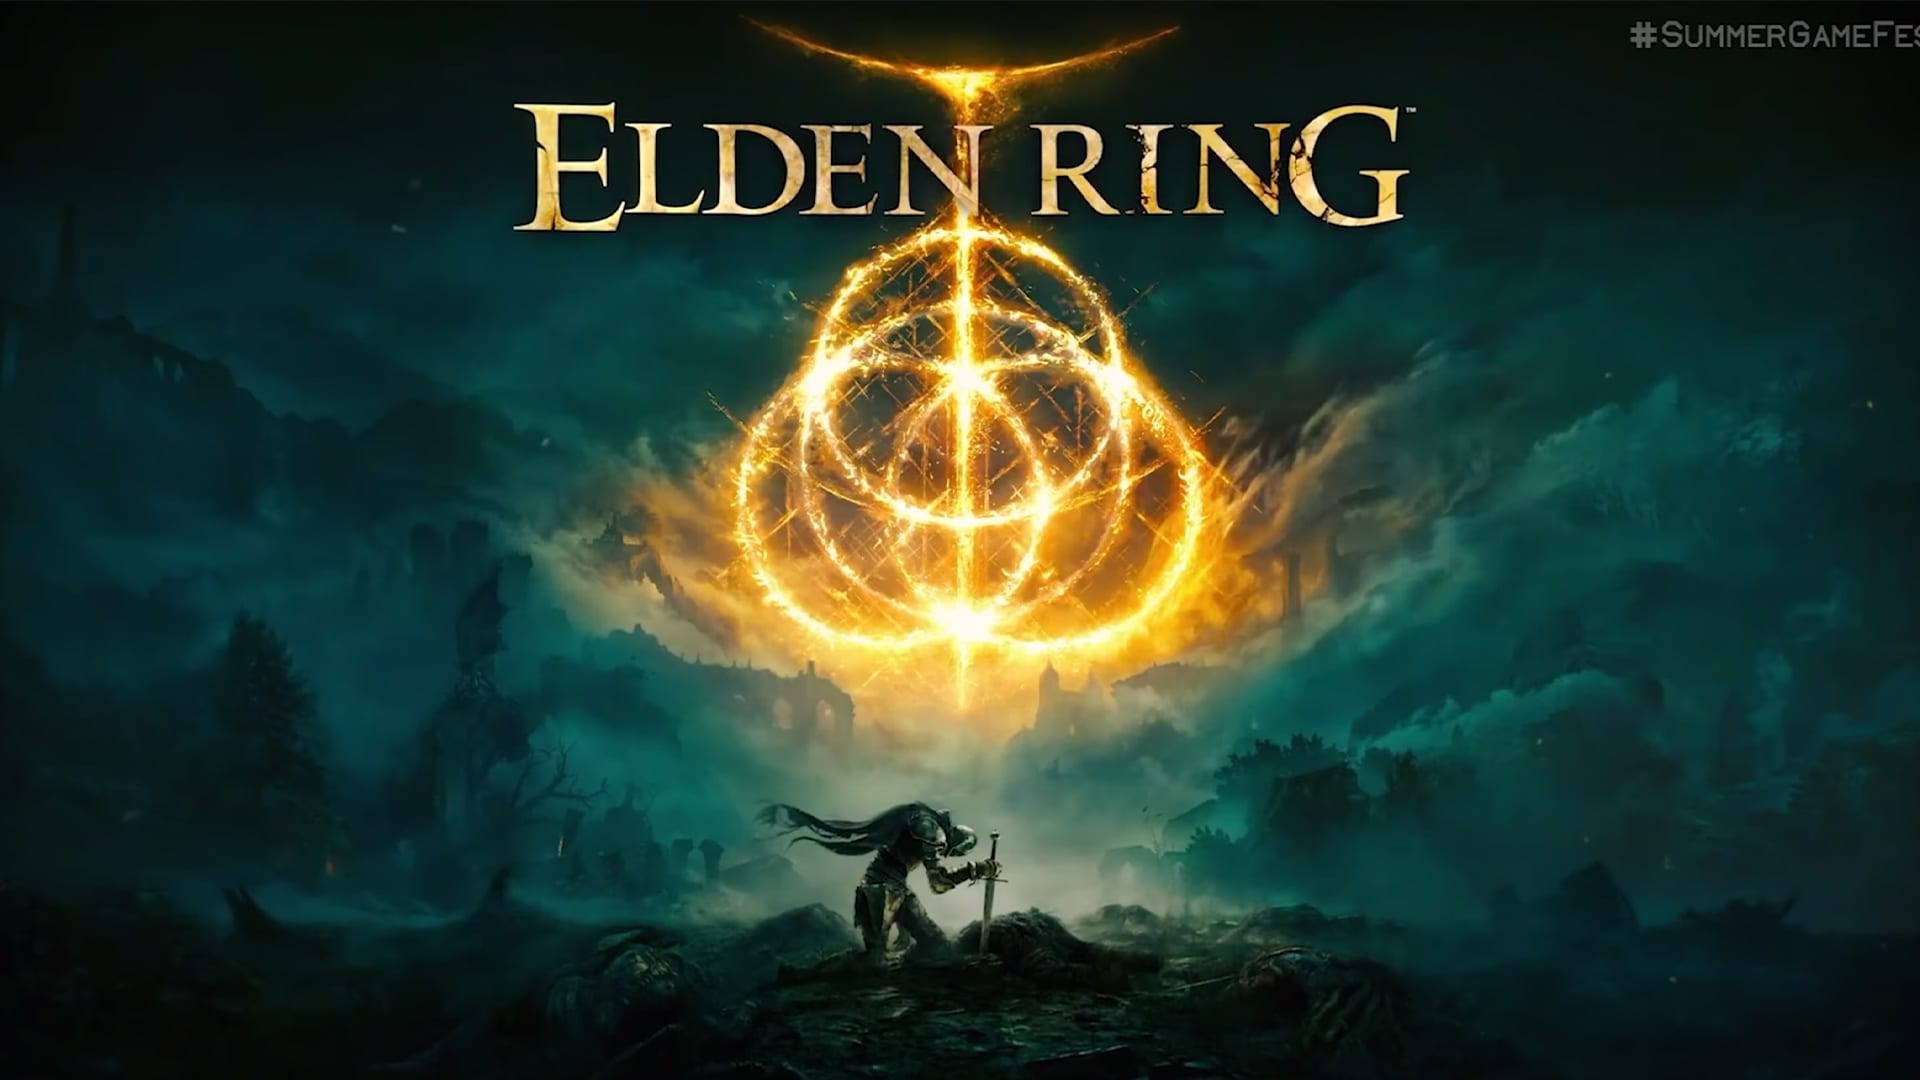 All you need to know about Bandai Namco’s latest RPG 'Elden Ring'